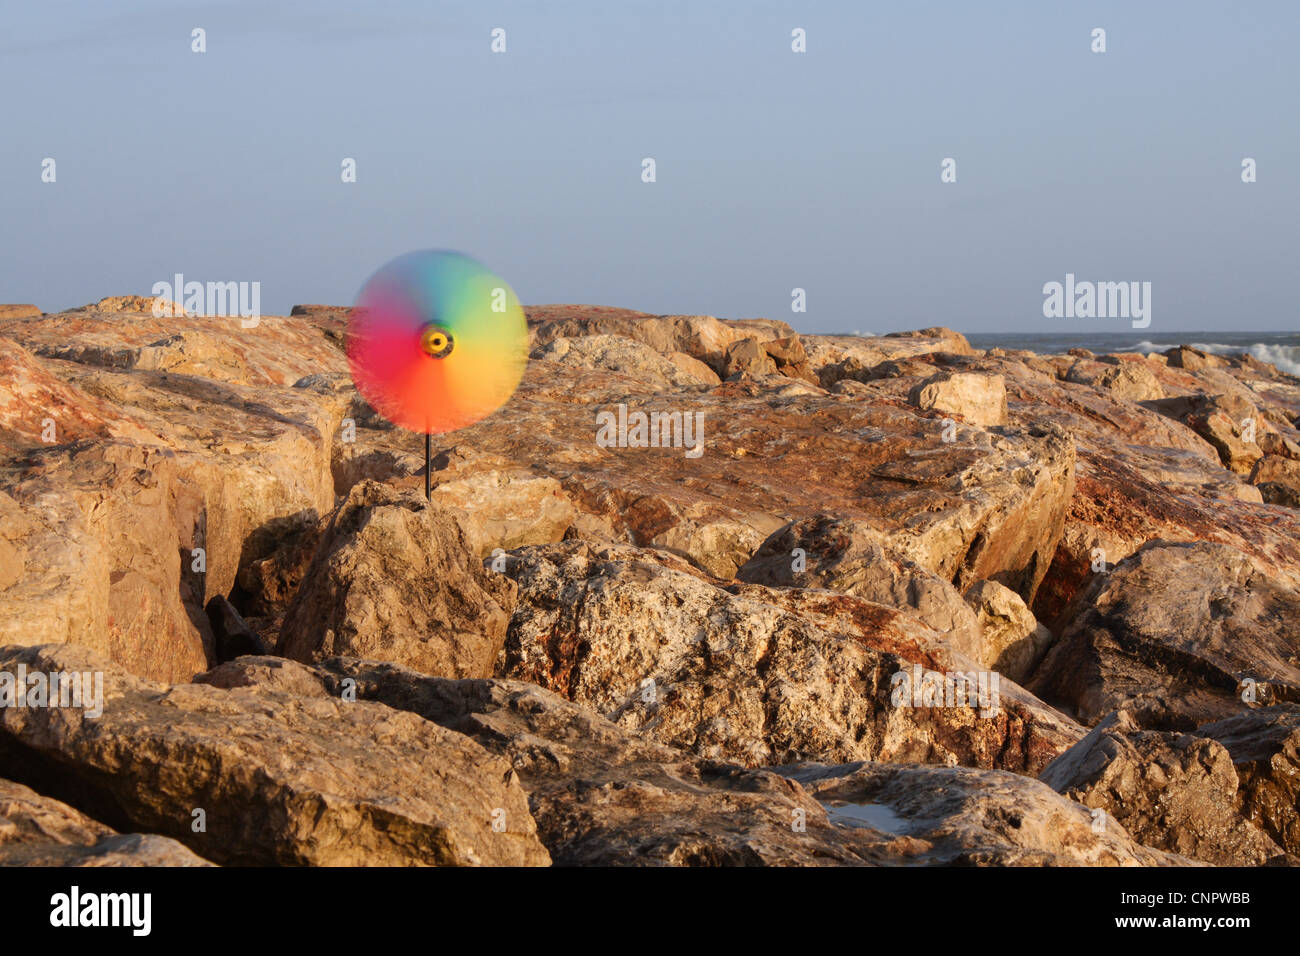 A colorful pinwheel turns with the energy of the wind in a seascape scenario in the golden hour. Stock Photo